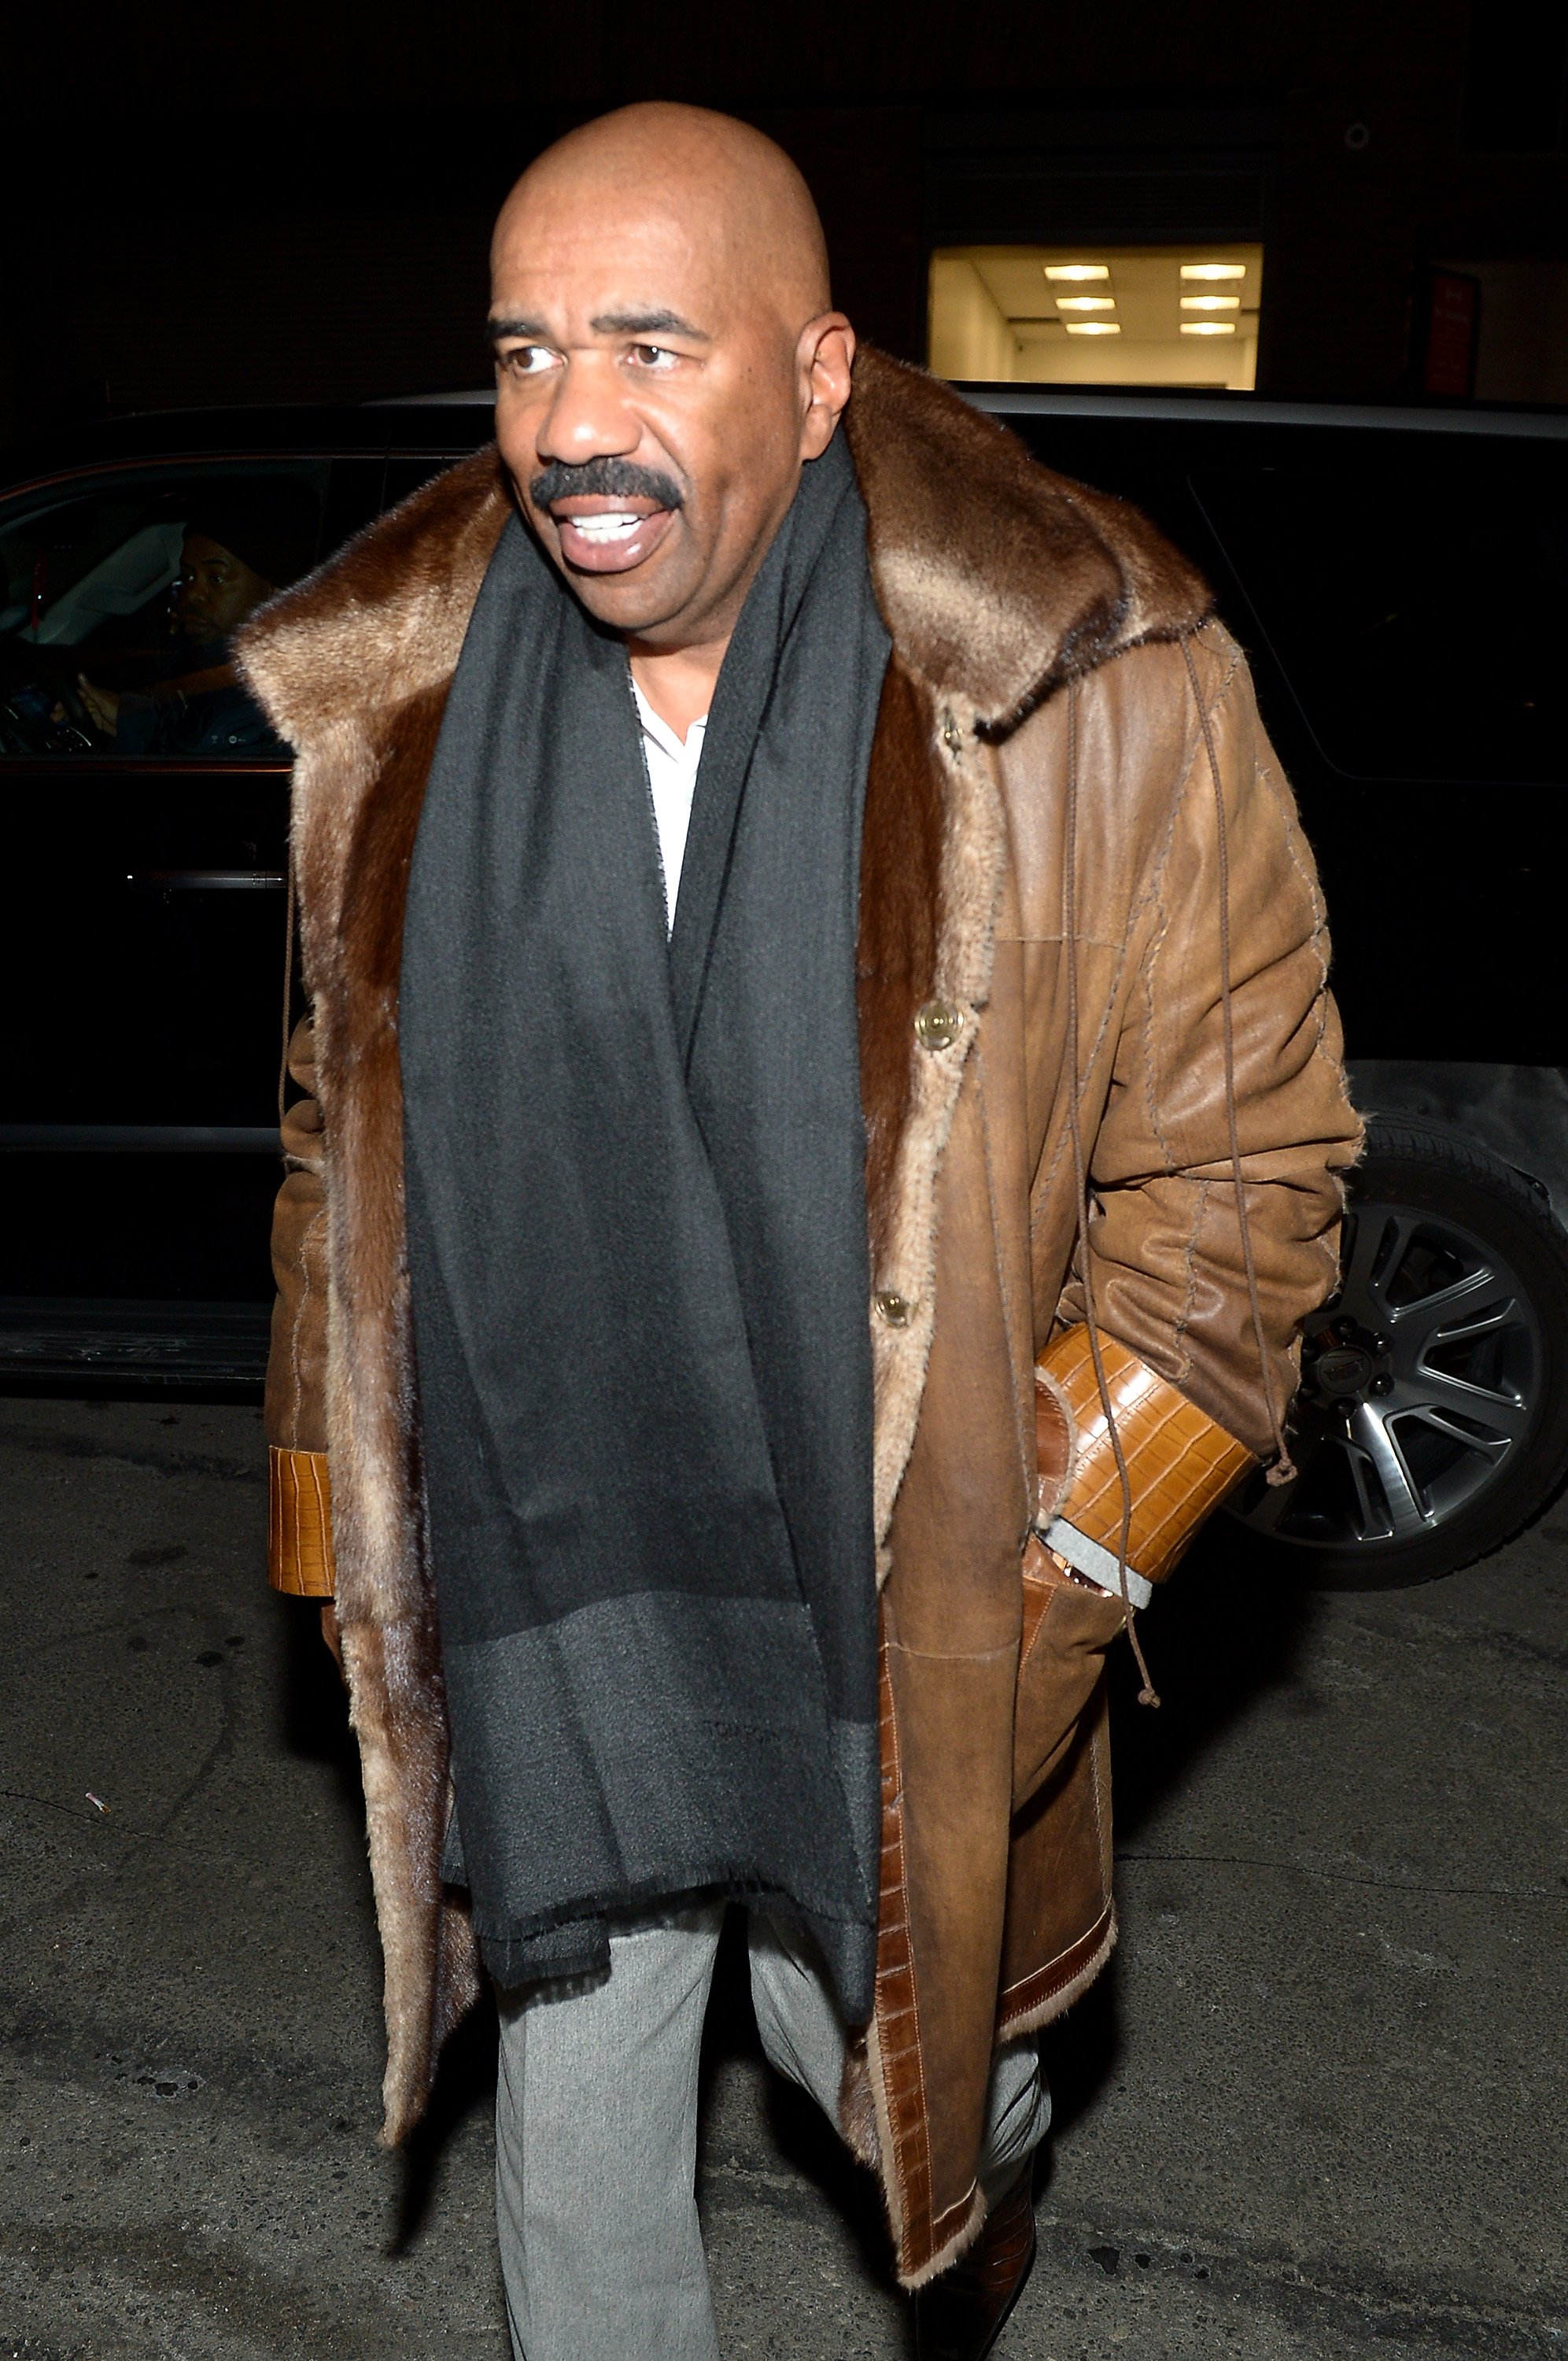 Steve Harvey attends day 4 of New York Fashion Week in New York City on February 14, 2016 | Photo: Getty Images